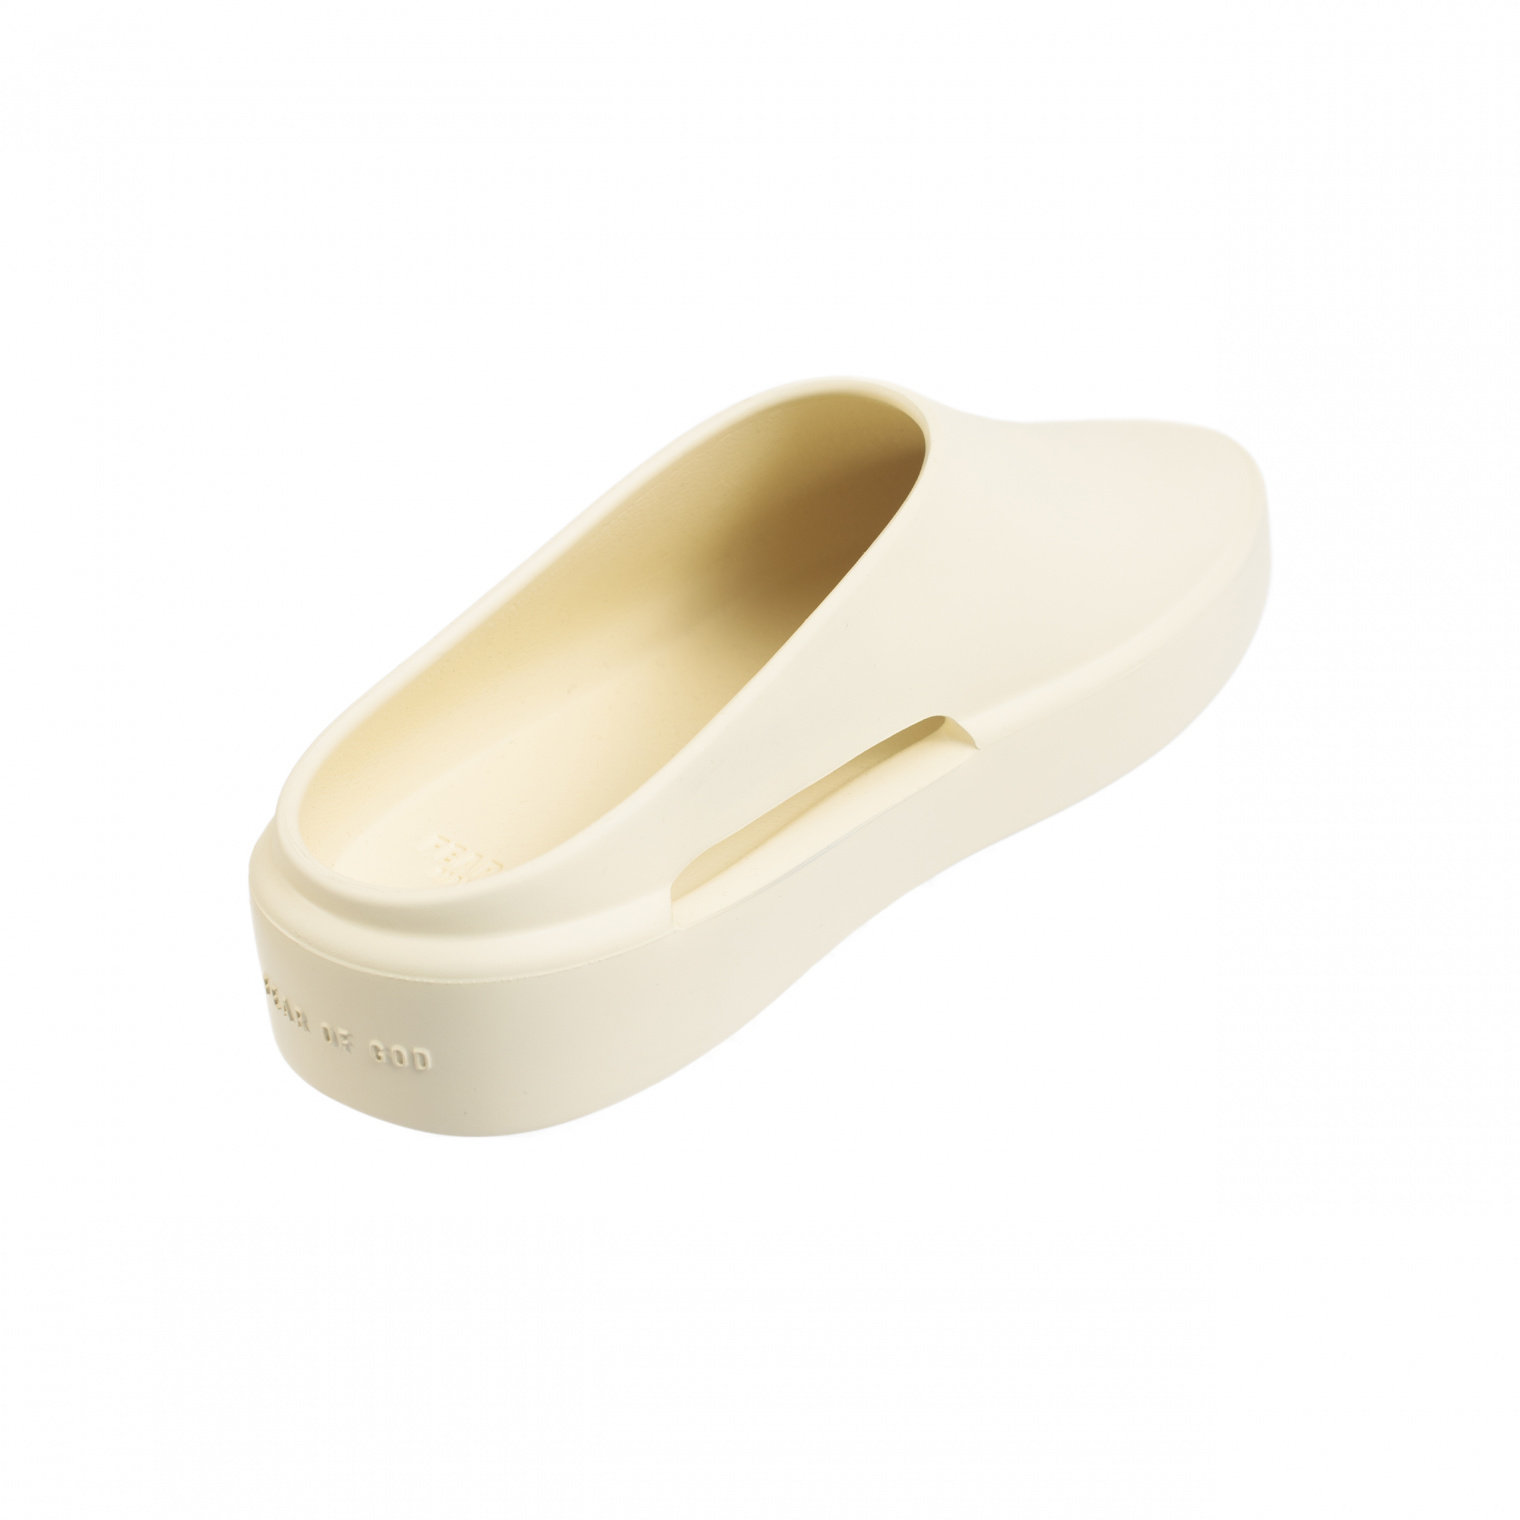 Fear of God Essentials The California slip-on shoes in cream